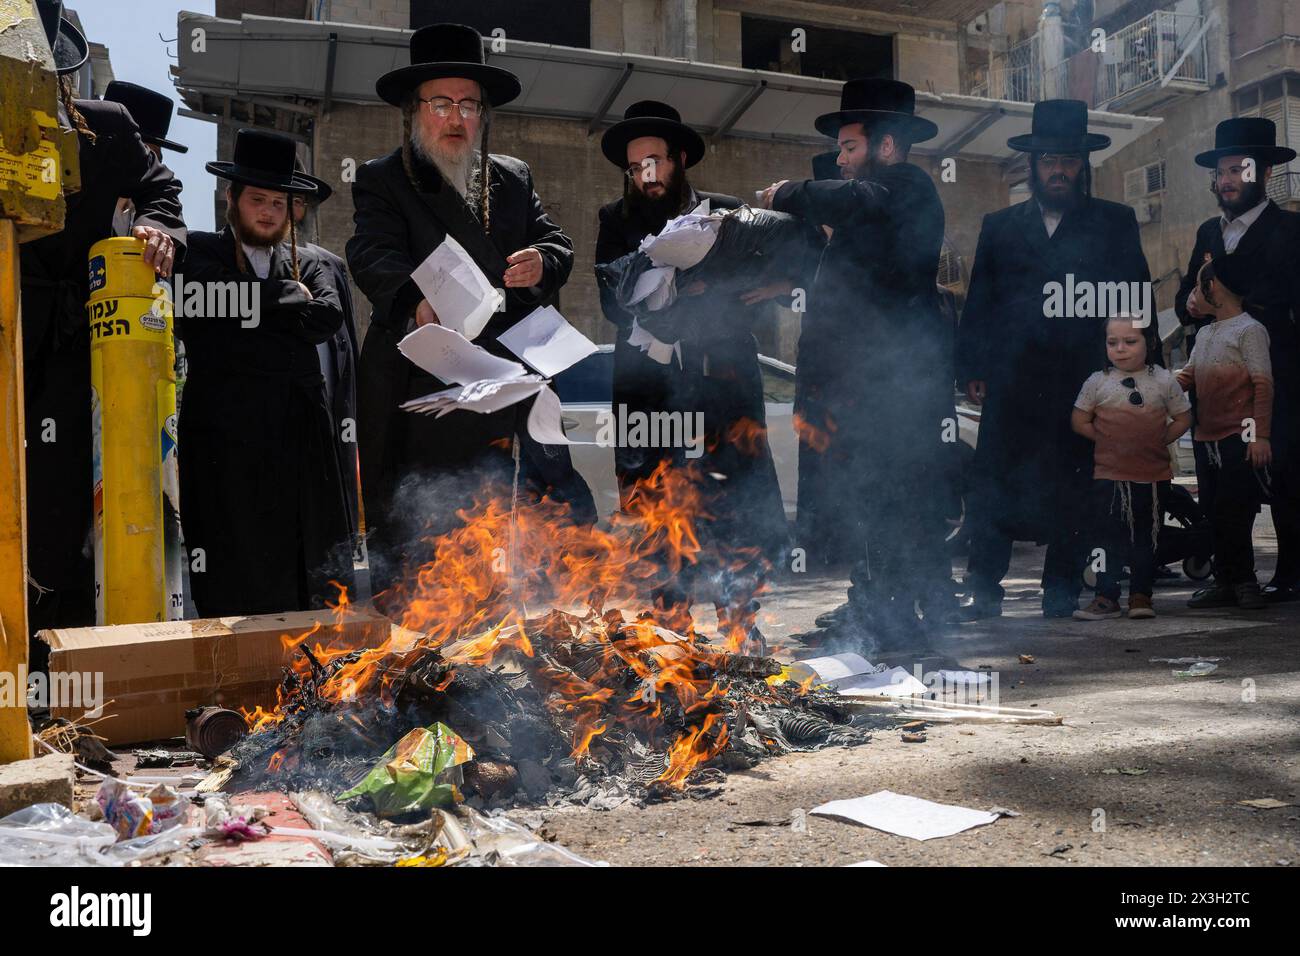 Bnei Brak, Israel. 22nd Apr, 2024. A Jewish Rabbi is seen throwing papers to the fire. During the Biur Chametz, religious Jews fulfill their obligation to inspect their homes for any leaven and eliminate it before the night of Passover. In ultra-Orthodox cities in Israel, fires are set up in major locations in the city for this purpose, where people bring their bread leftovers to burn the leaven. During the seven days of Passover, they are prohibited from eating or possessing any leaven, symbolizing the dough the Israelites did not have time to allow to rise before the Exodus from Egypt. Biur Stock Photo